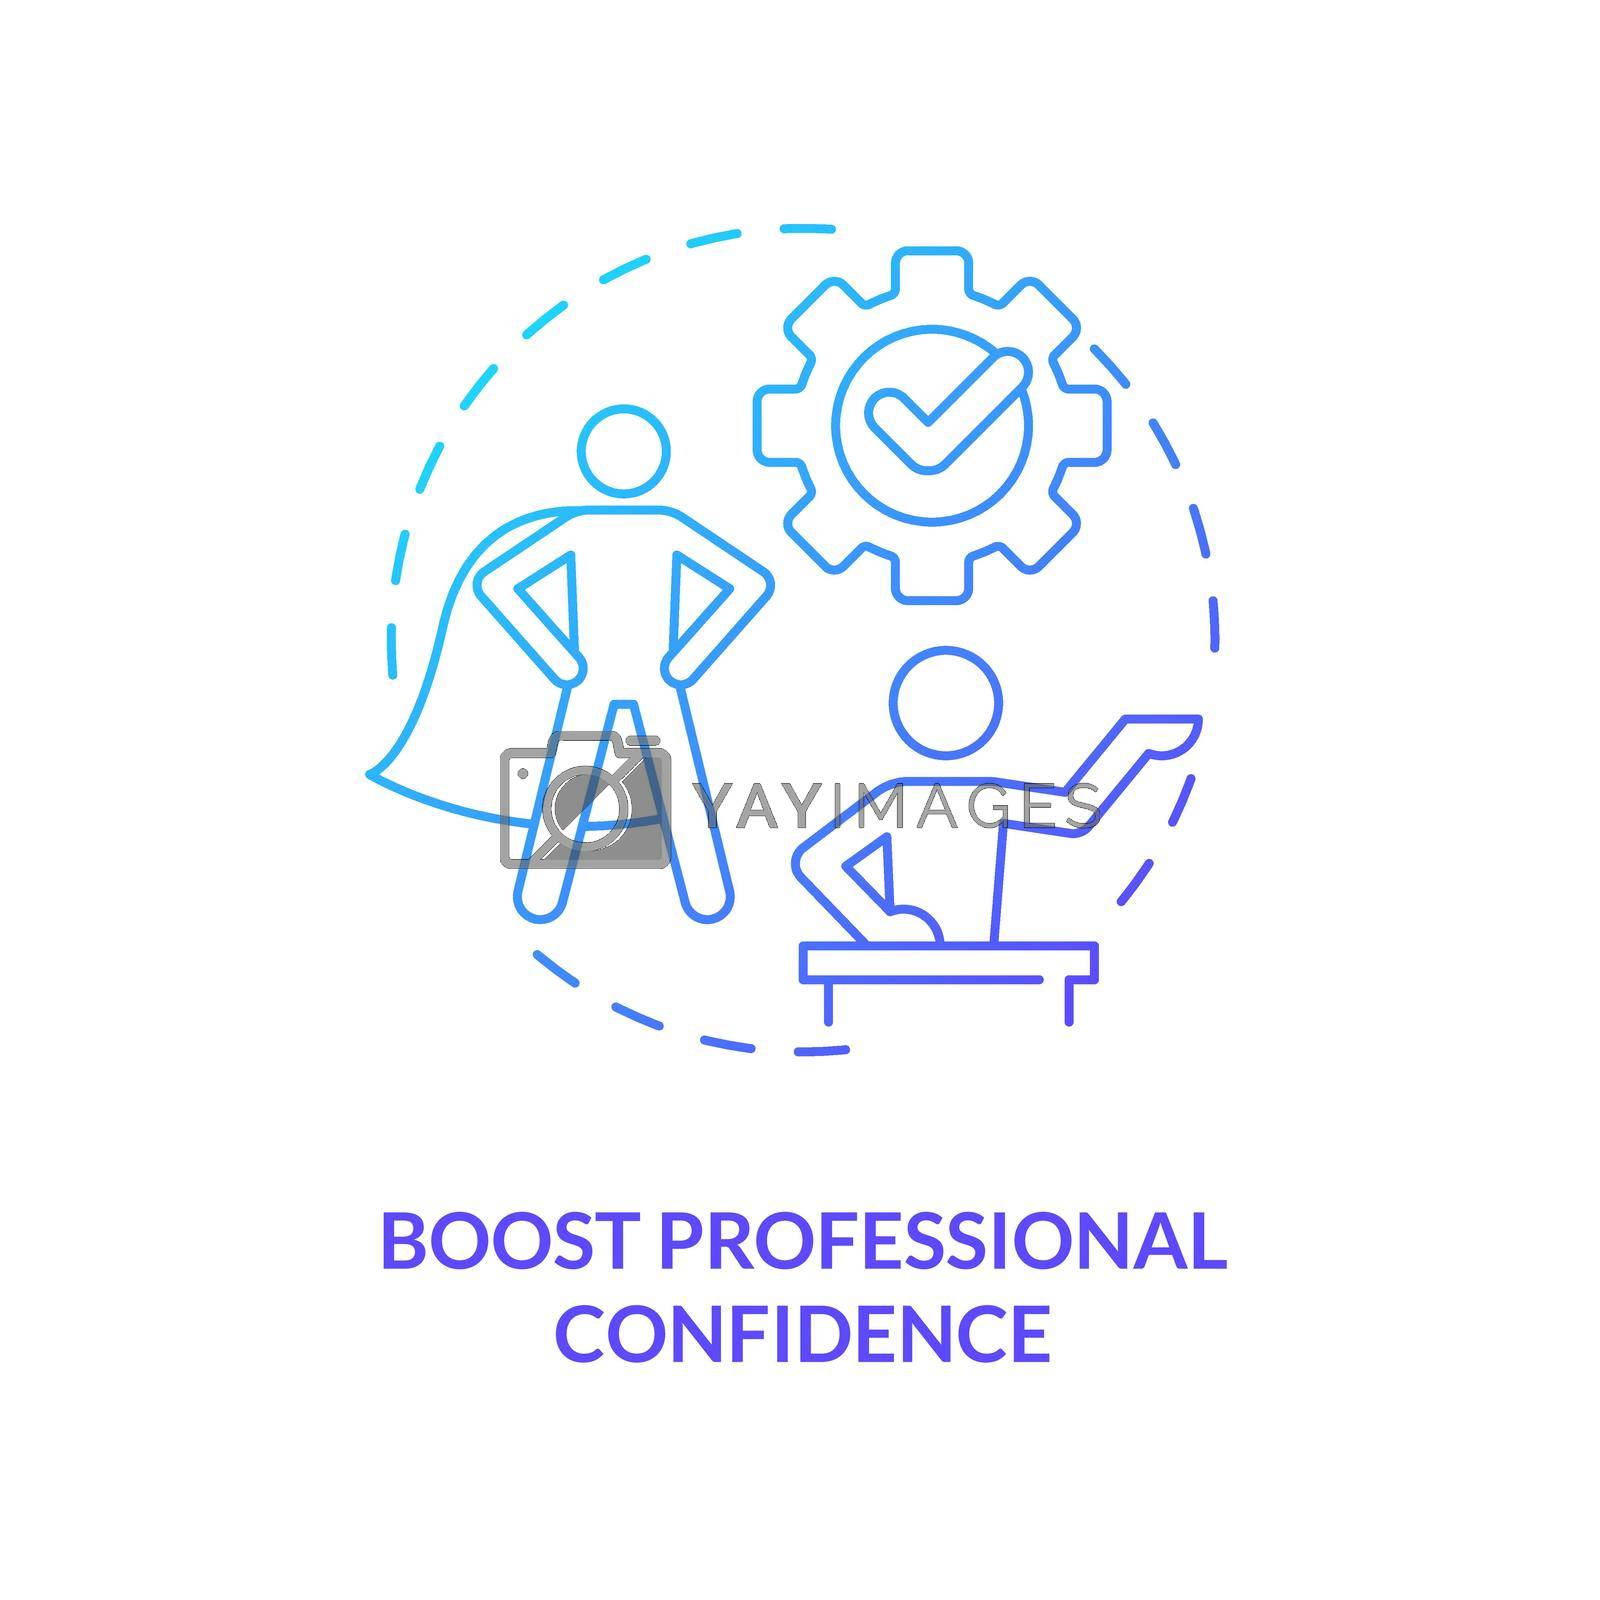 Royalty free image of Boost professional confidence blue gradient concept icon by bsd